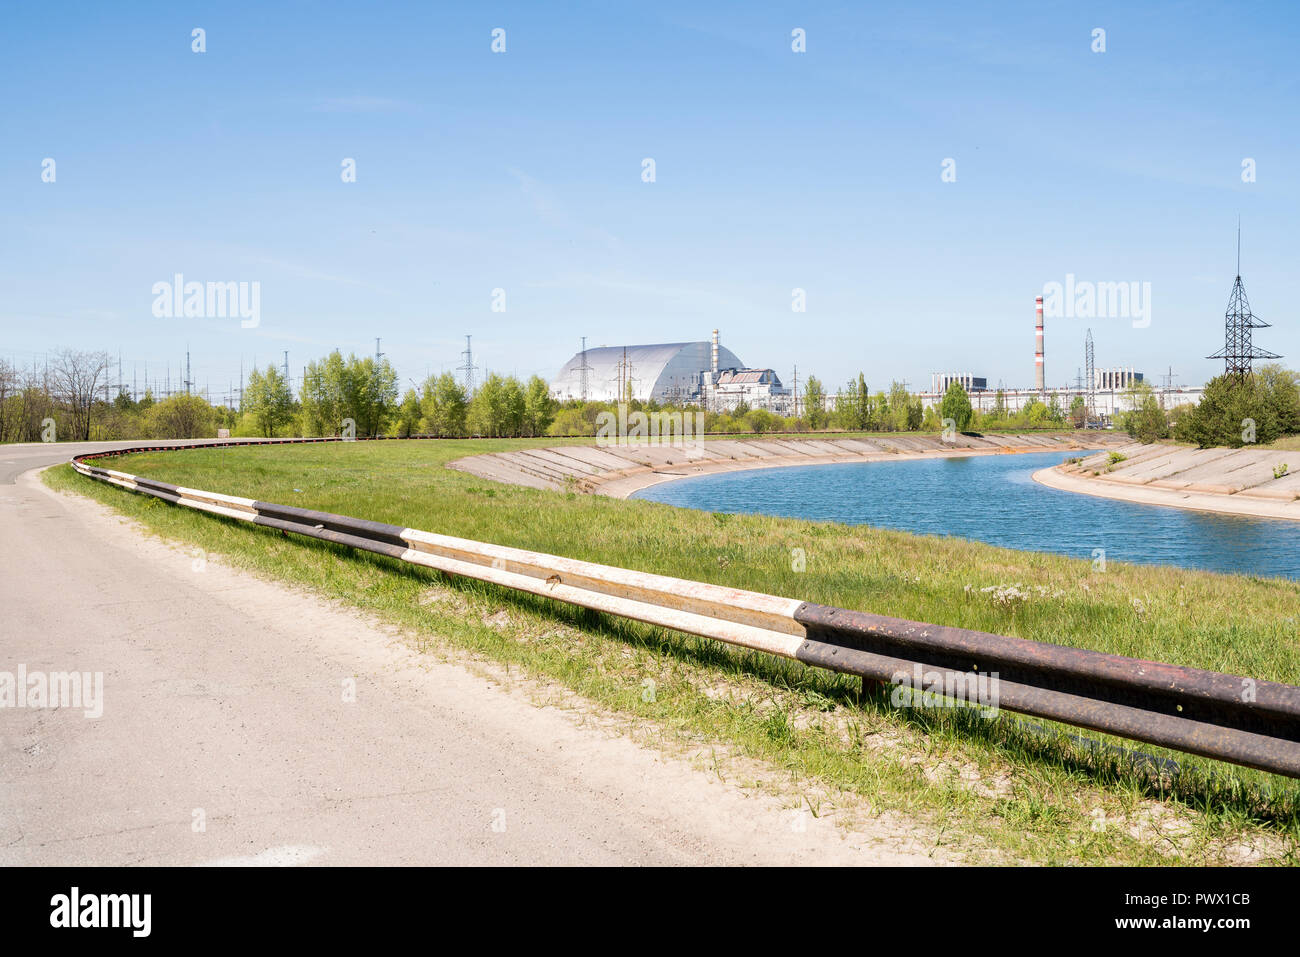 View along a rural road towards Chernobyl, Ukraine, the massive steel and concrete structure covering the nuclear reactor No. 4 in the distance. Stock Photo